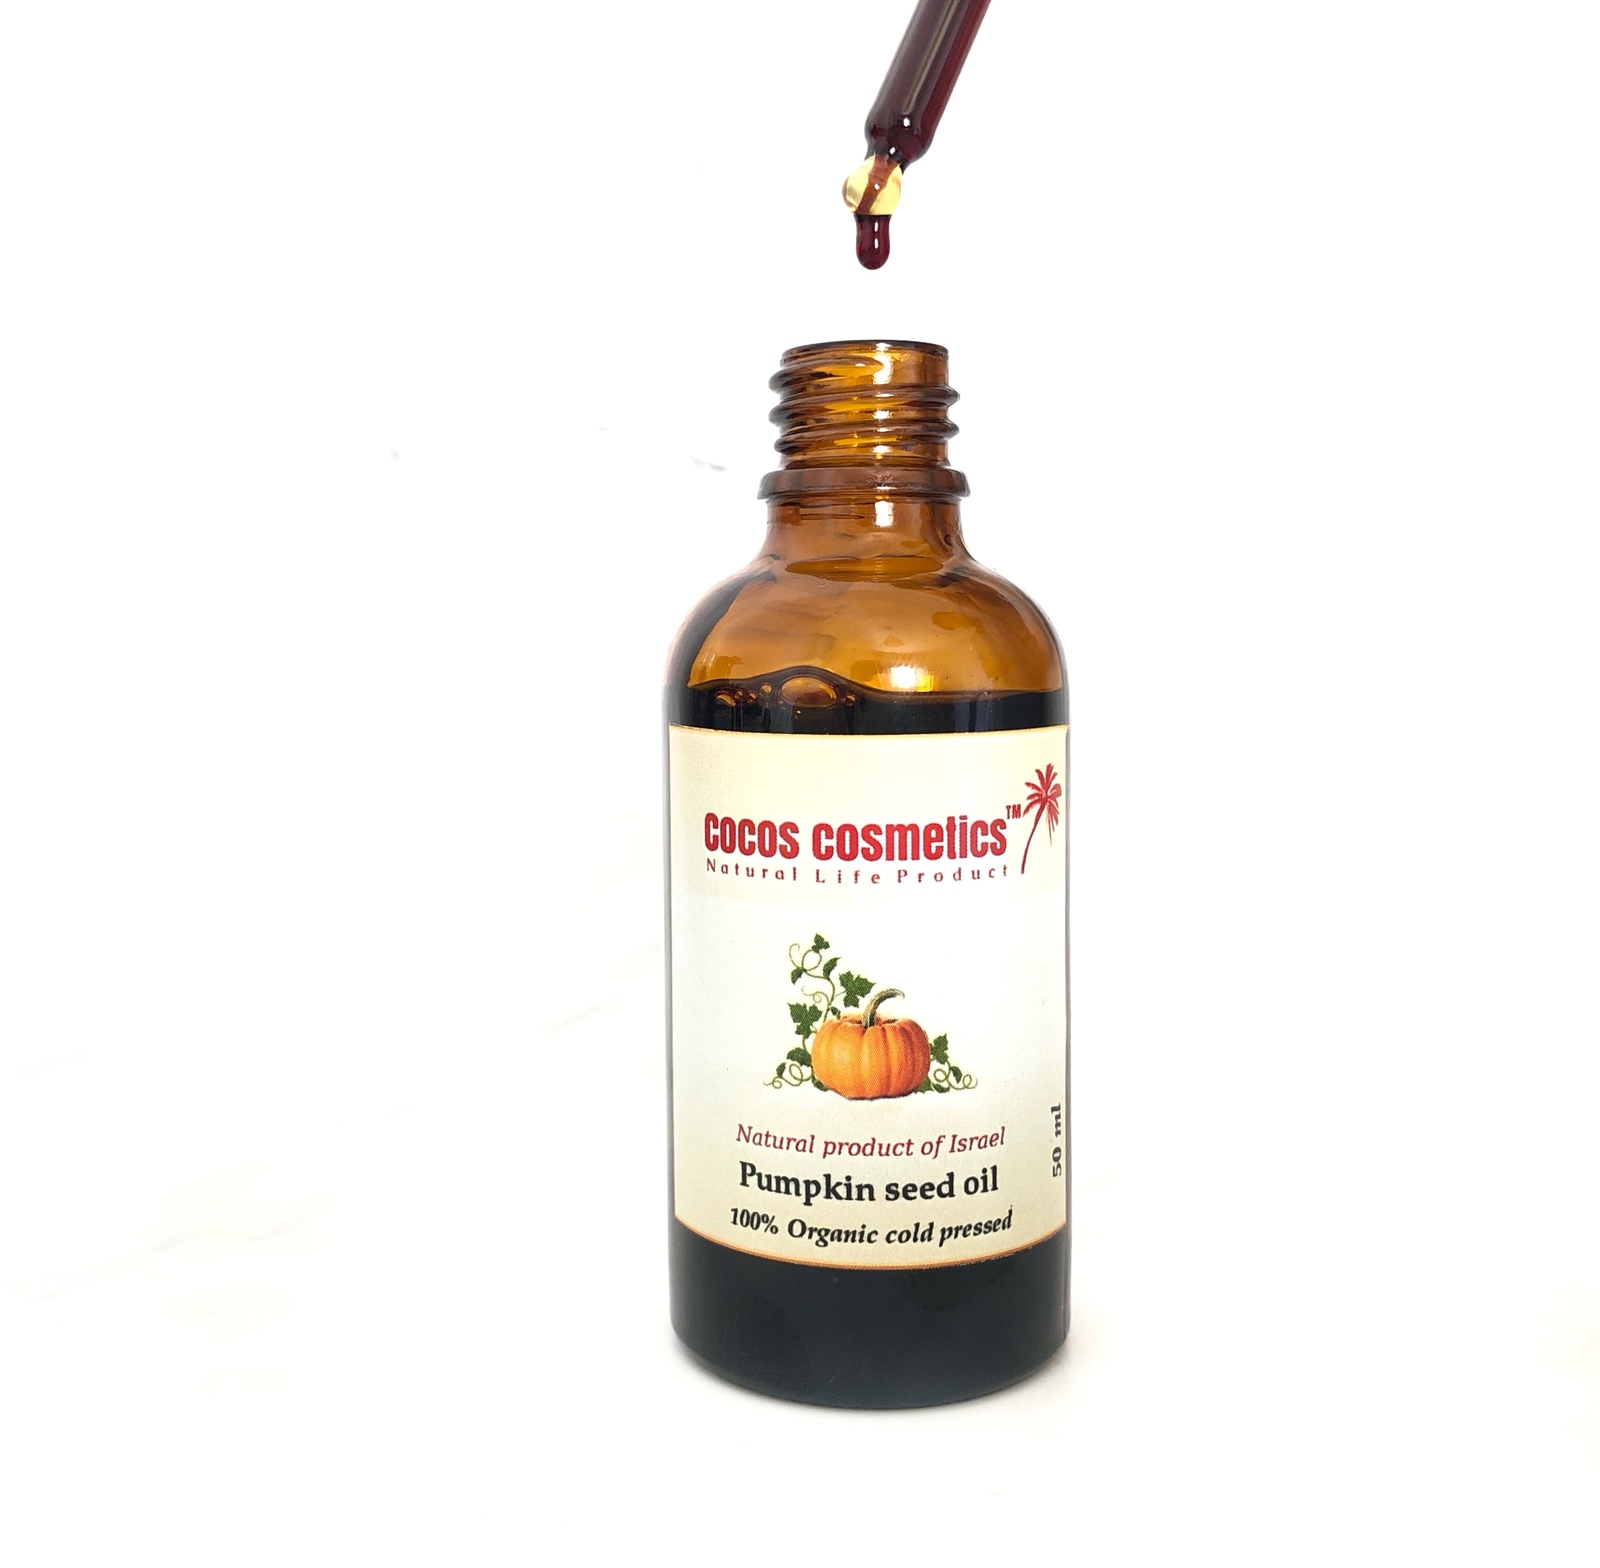 Facial oil Pumpkin Seed Oil 50 ml pure organic undiluted cold pressed unrefined  - $17.99